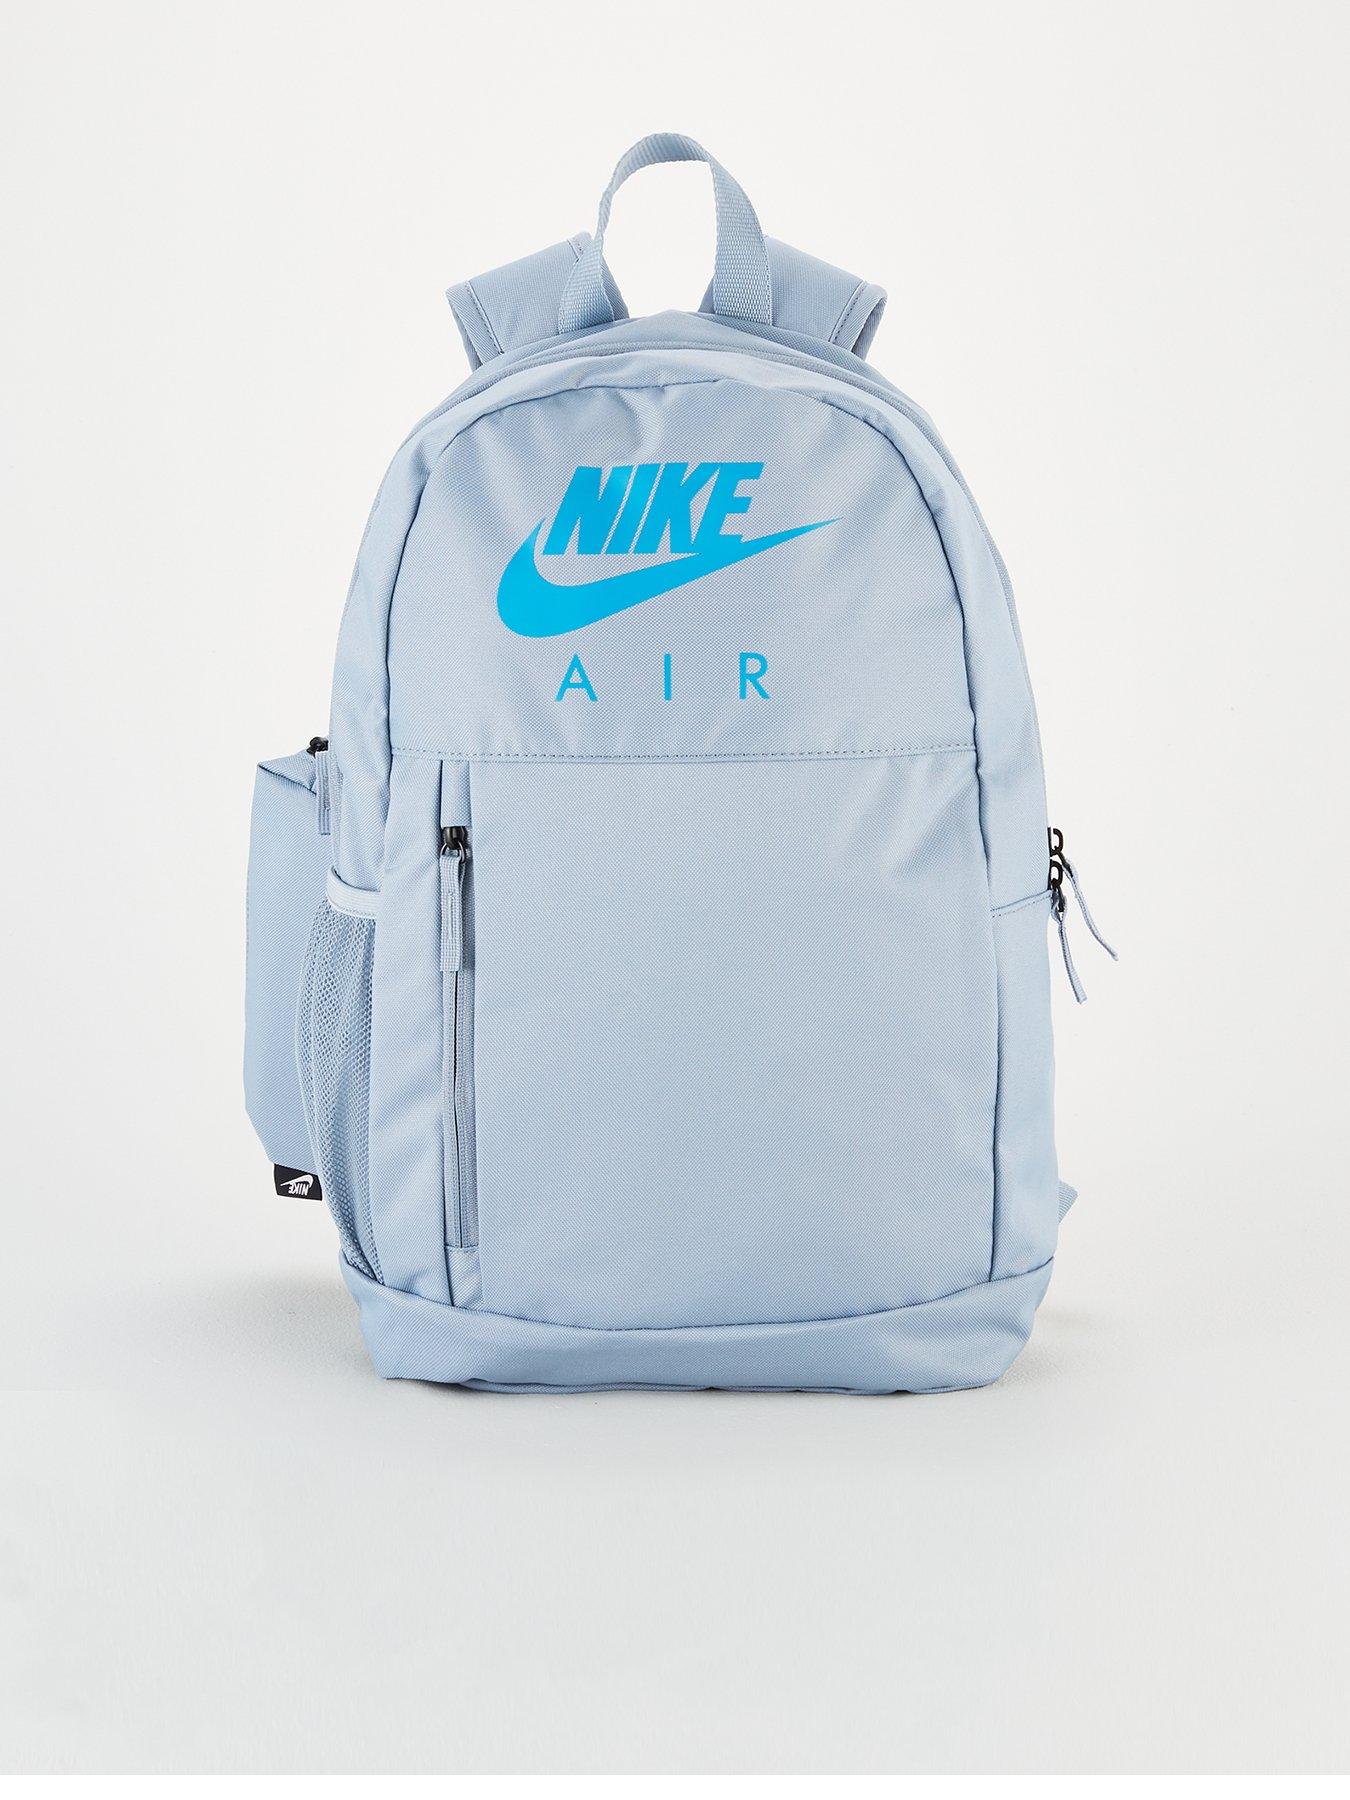 nike school bags with pencil case